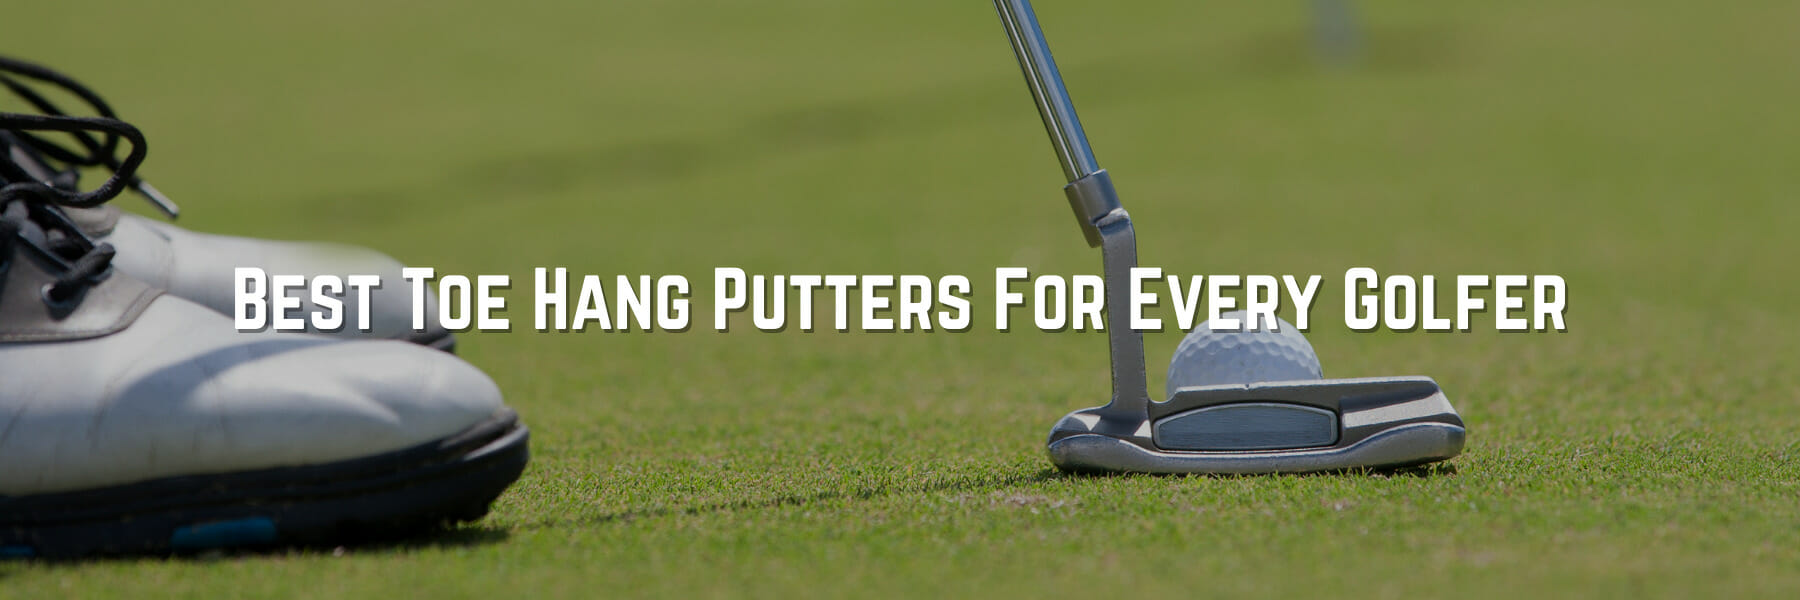 Best Toe Hang Putters For Every Golfer